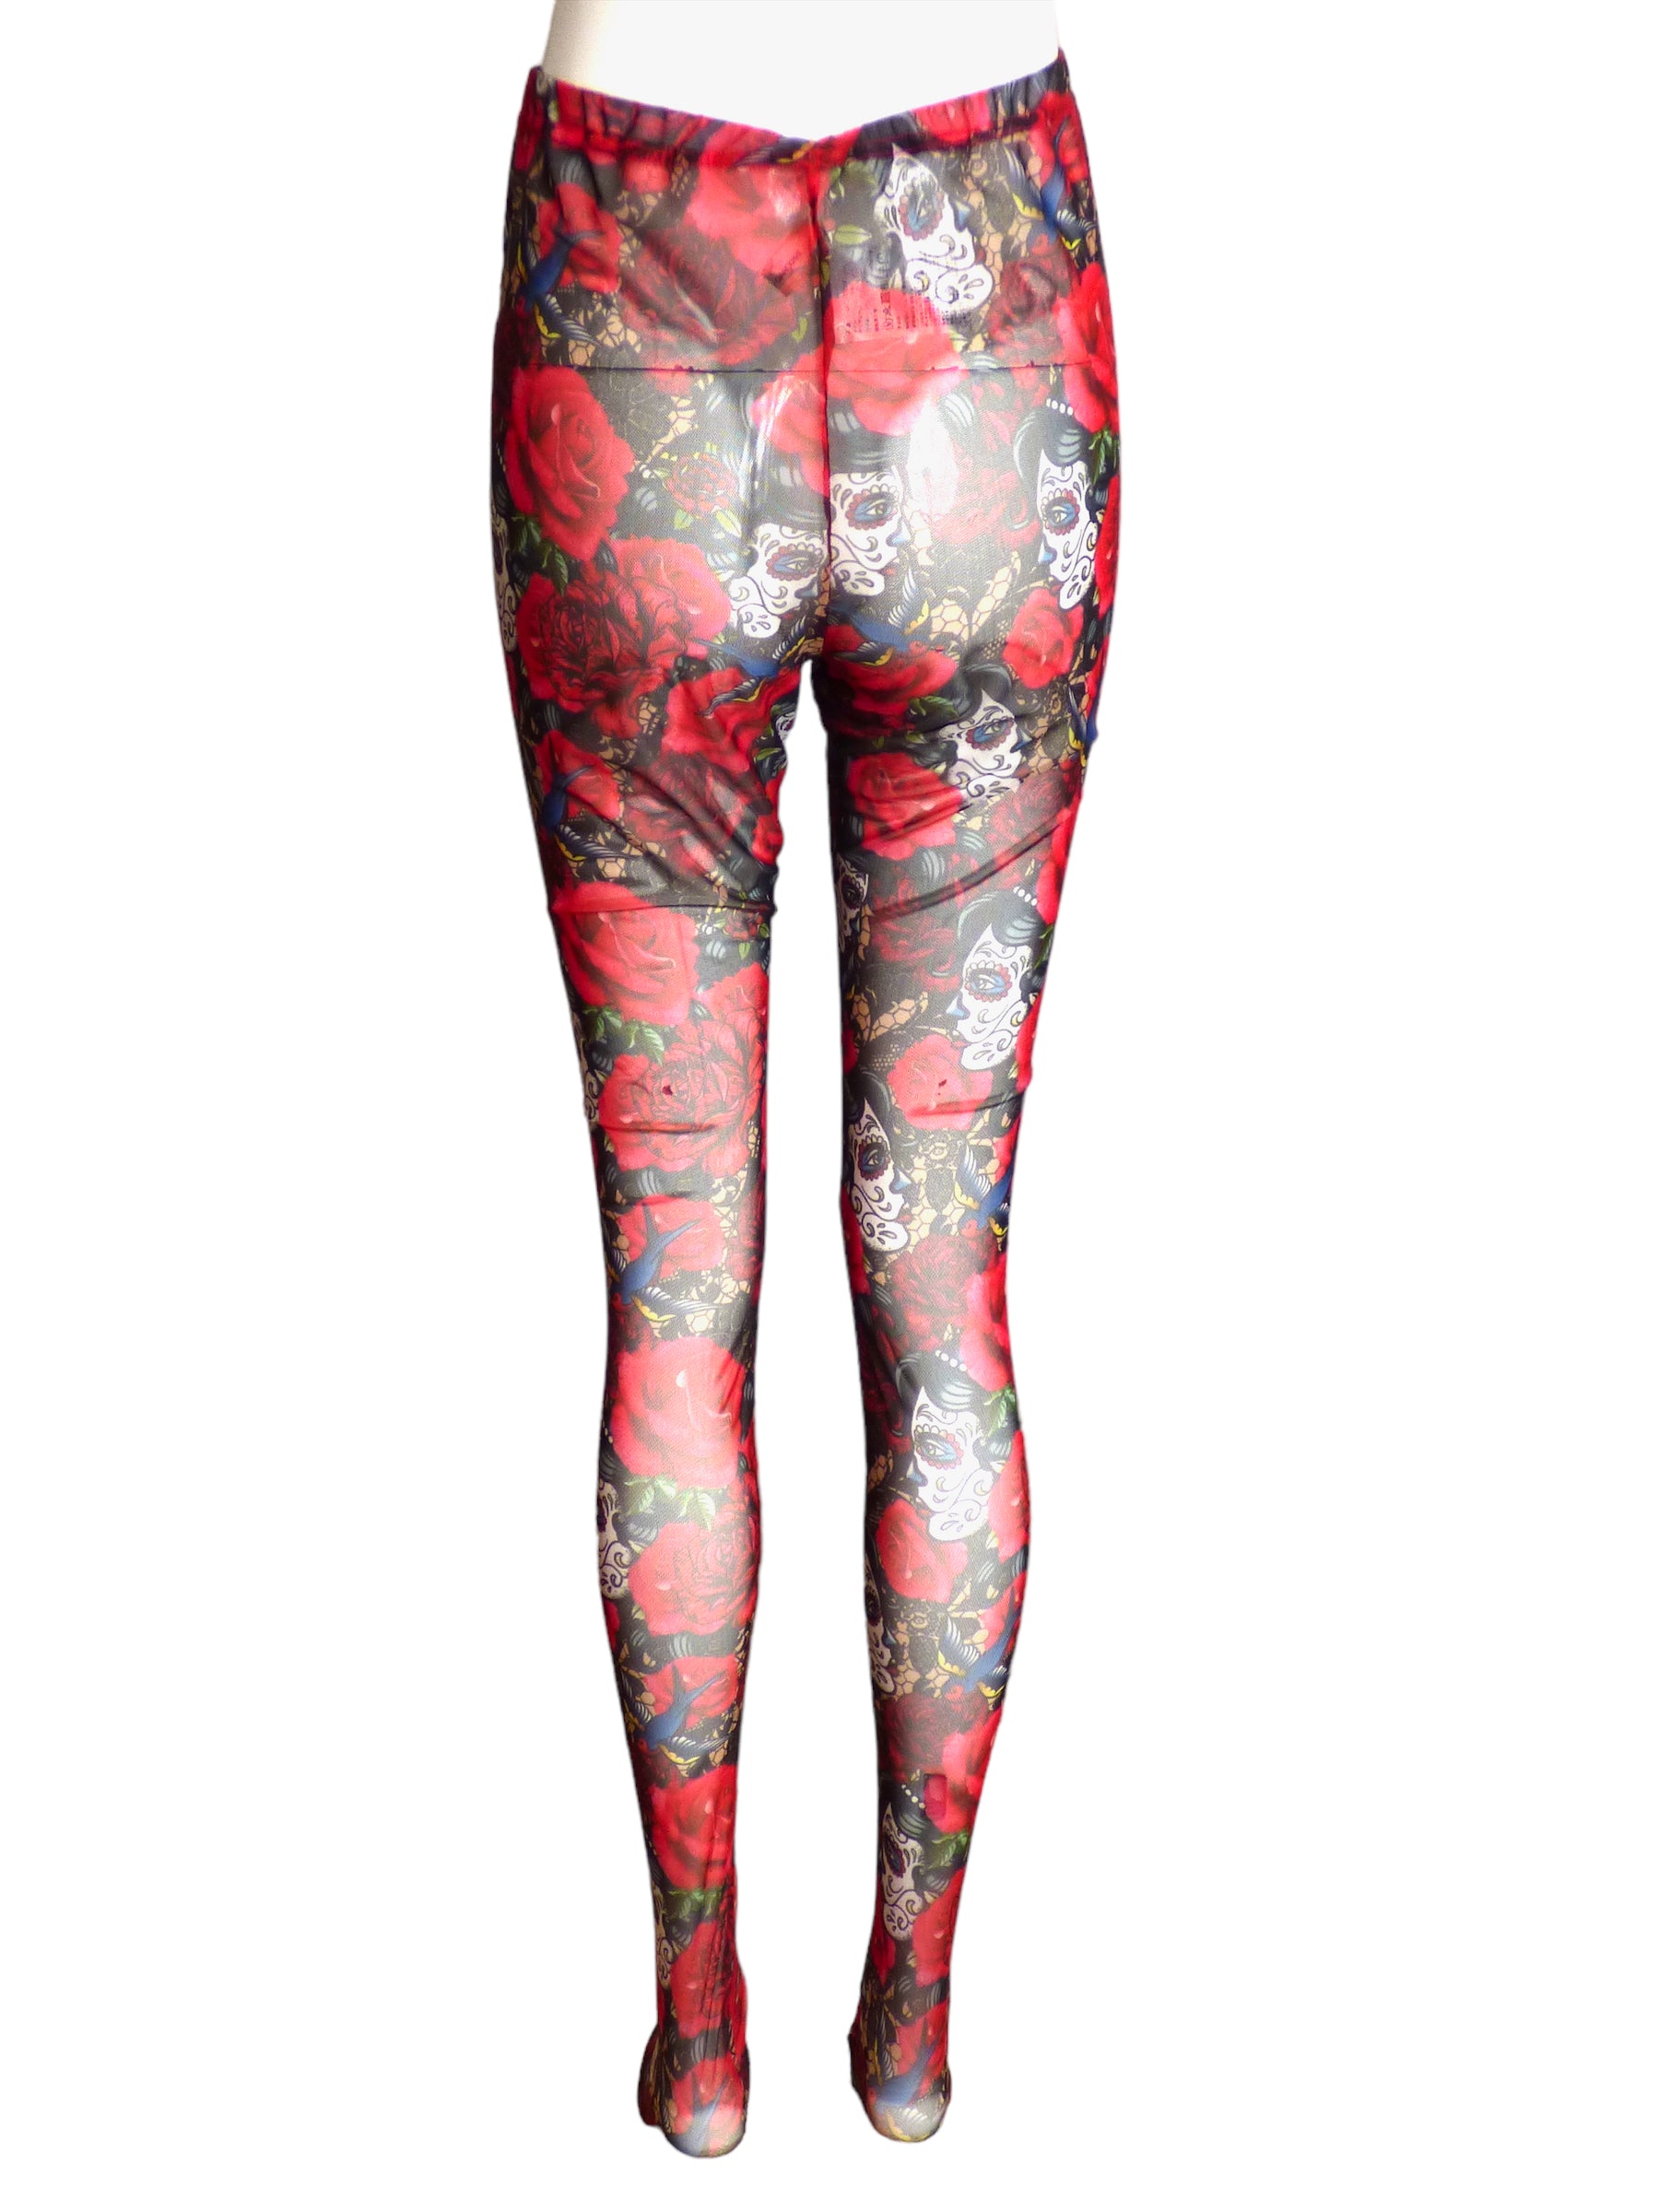 Patterned Tights Footless Printed Funky Alternative Tattoo Suspender  Quality | eBay